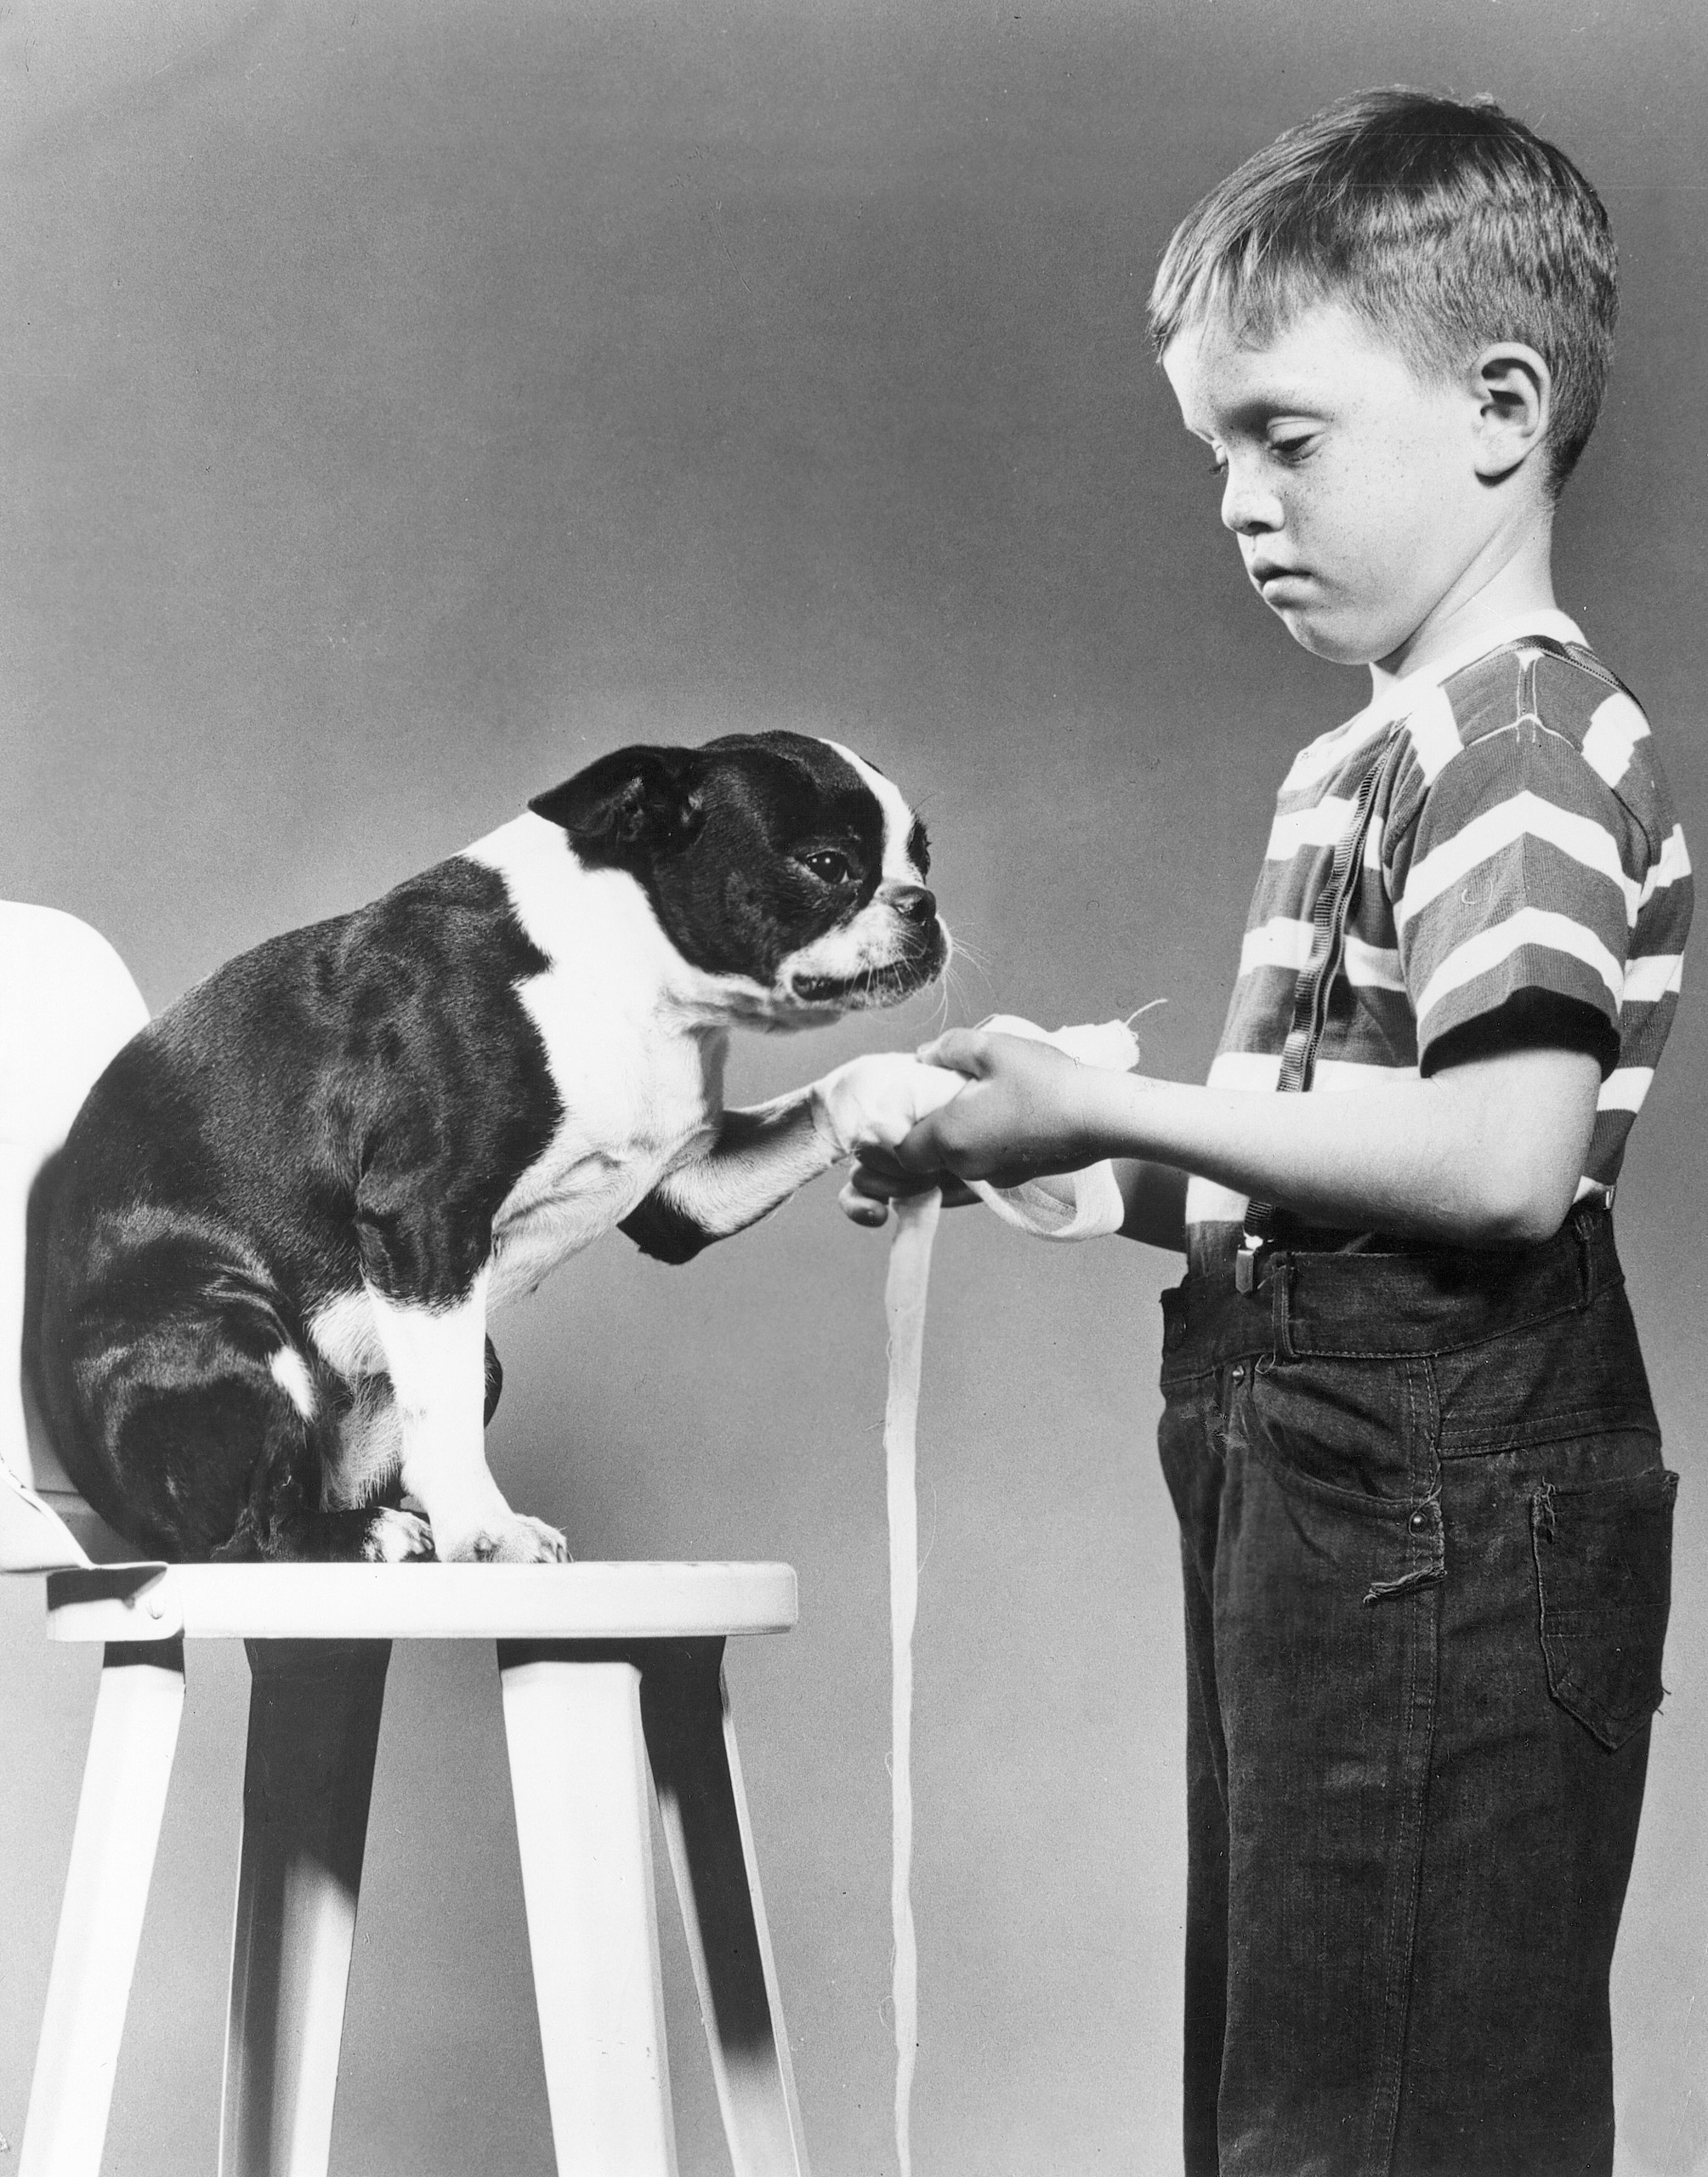 Boy in ASPCA humane education class learning to bandage a dog, 1950s